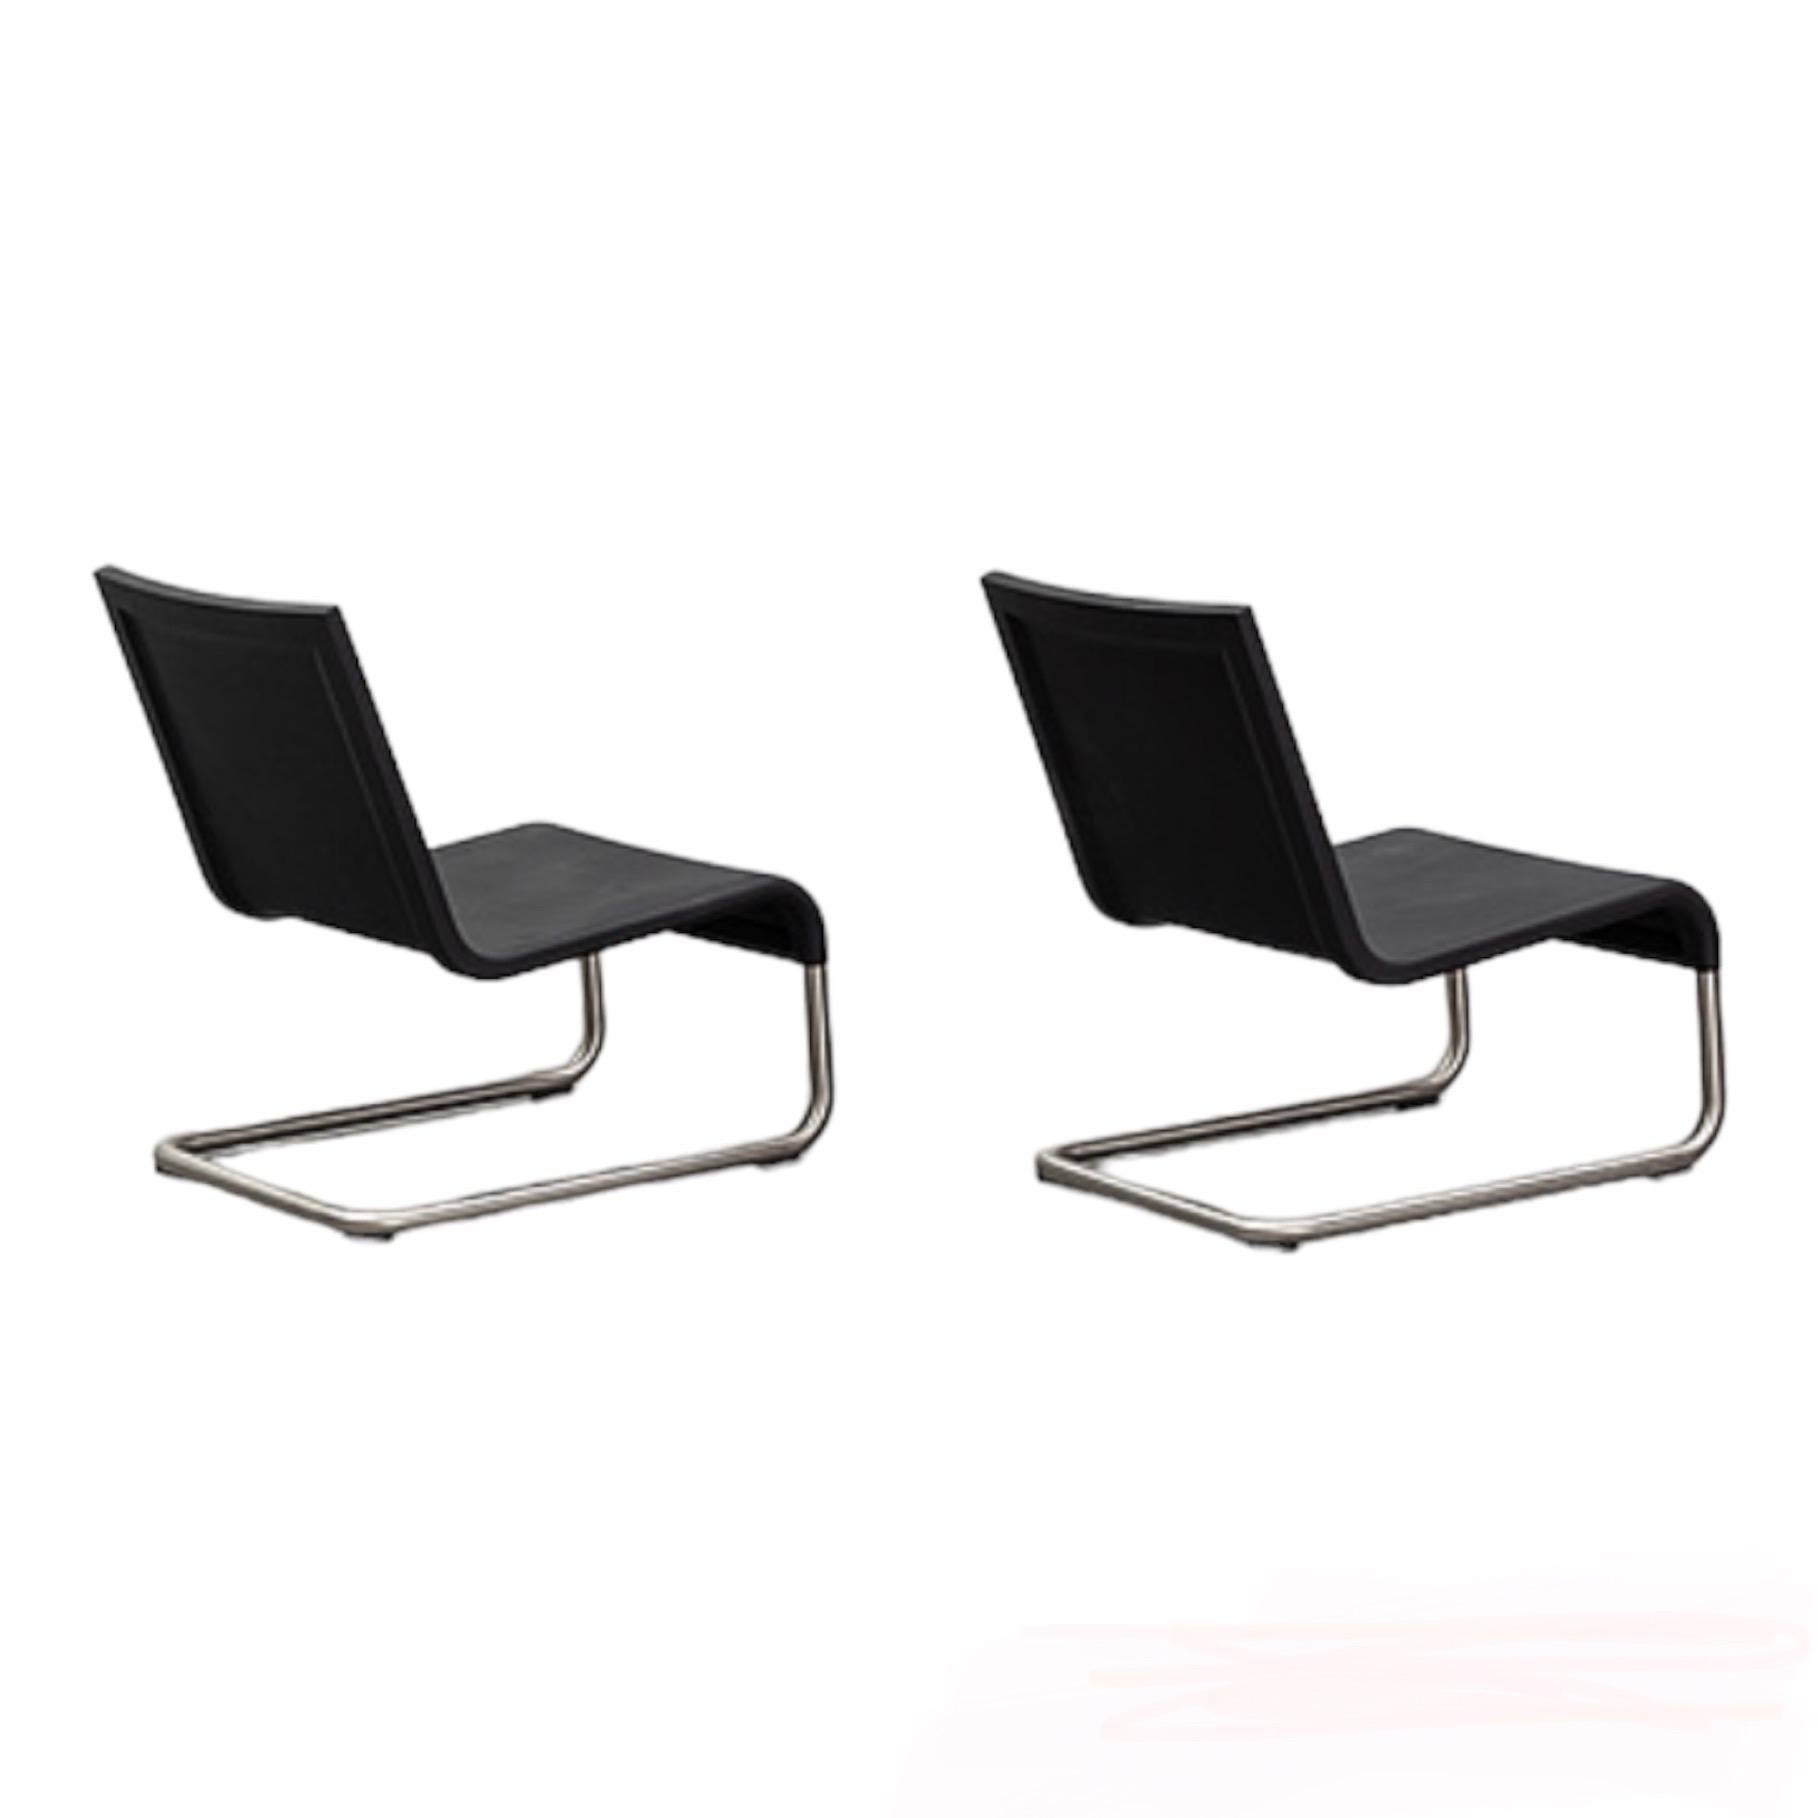 This is a pair of .06 lounge chairs, designed by Maarten van Severen for Vitra in 2005.
It has a brushed stainless steel frame, and a soft polyurethane seat that is actually quite comfortable despite being solid with no cushion.
These chairs are